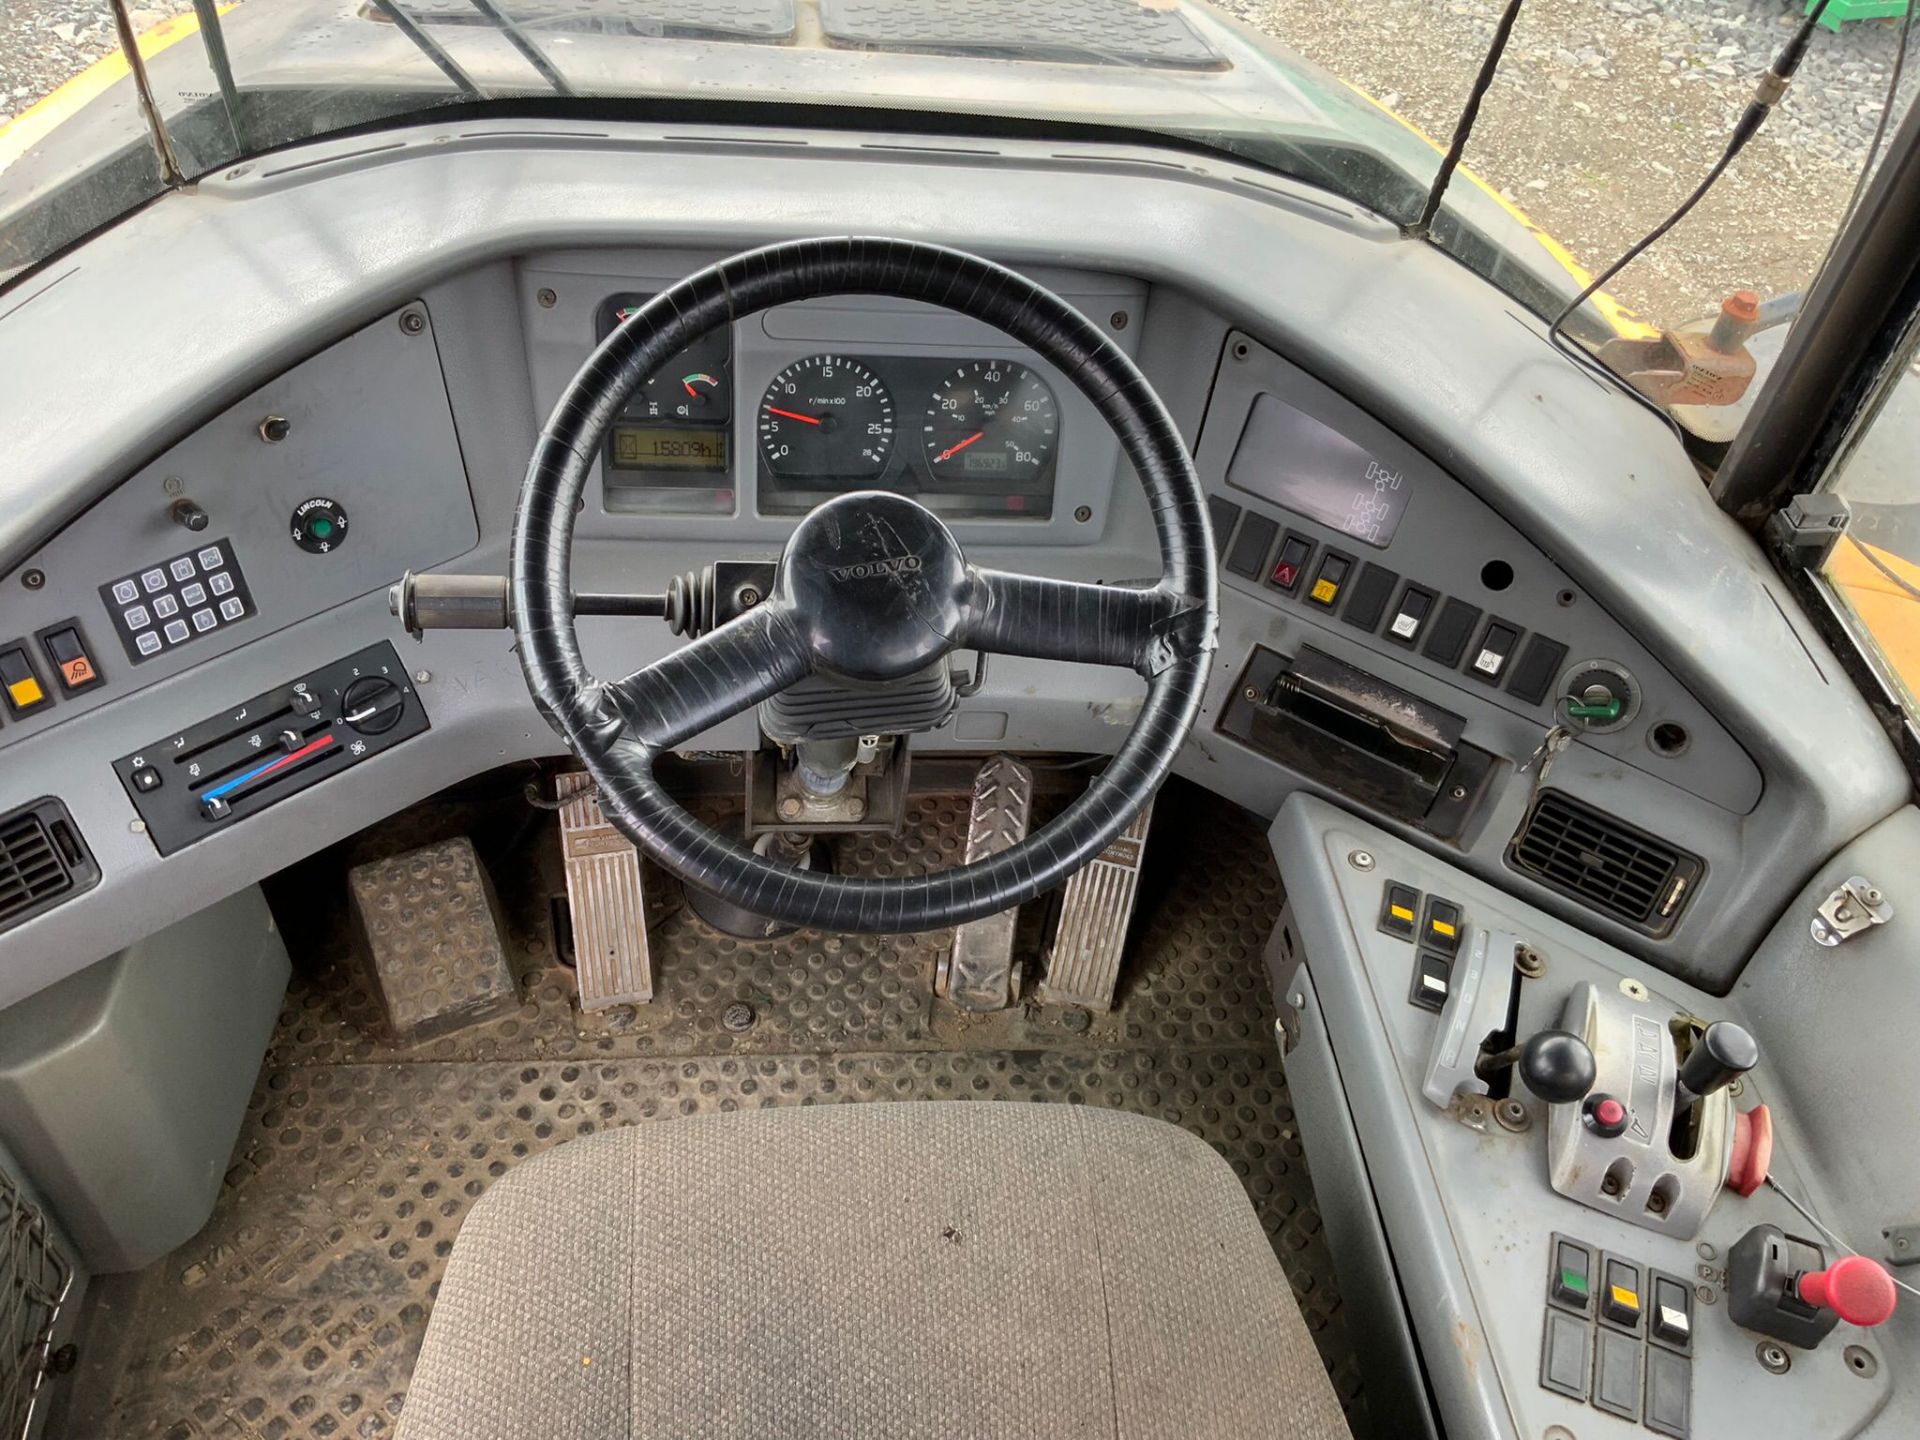 2000 VOLVO A40D ARTUCLATED DUMP TRUCK - Image 7 of 16